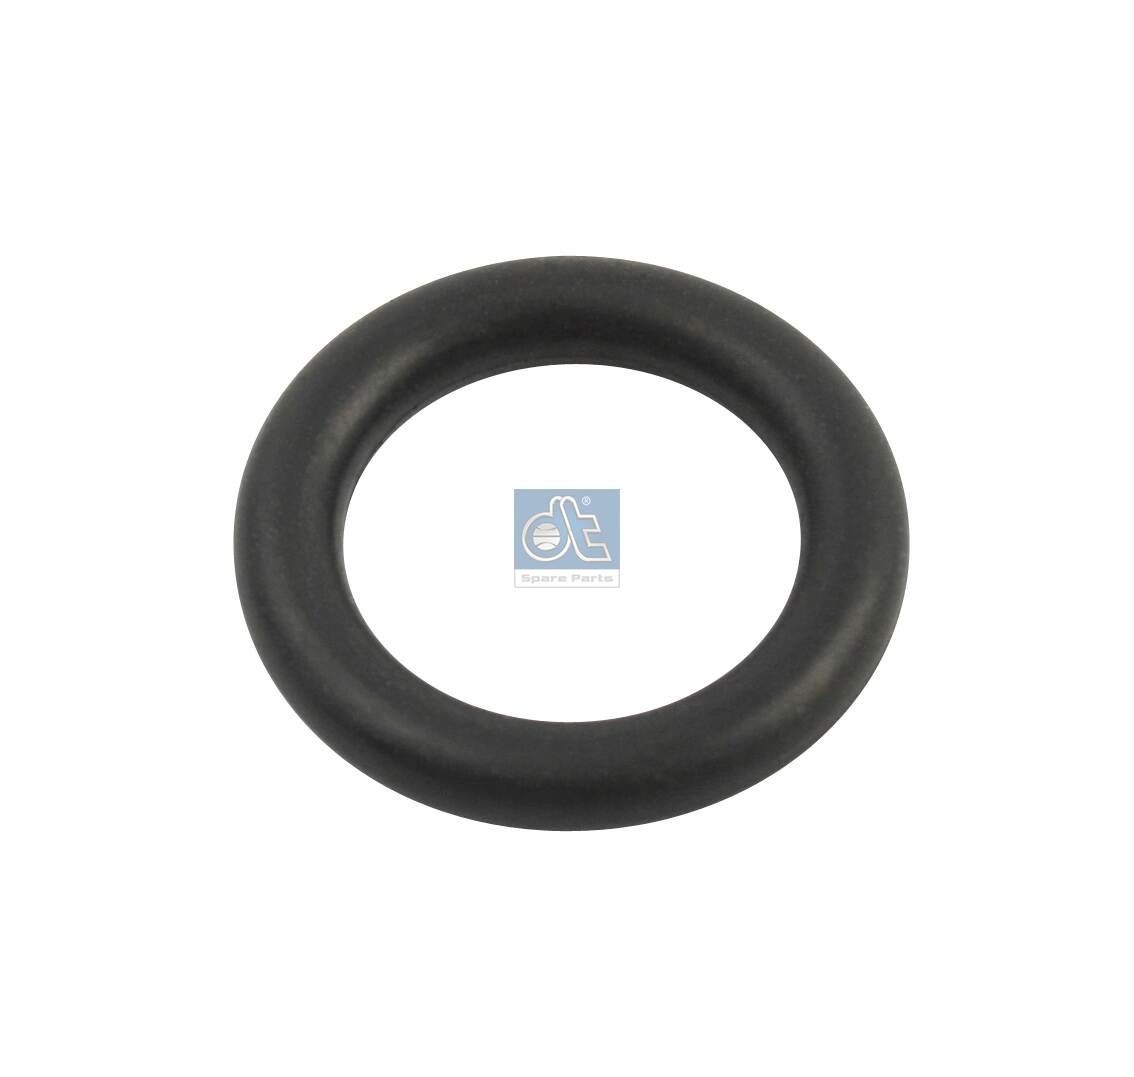 DT Spare Parts 1.24301 Seal Ring 12 x 3 mm, NBR (nitrile butadiene rubber)